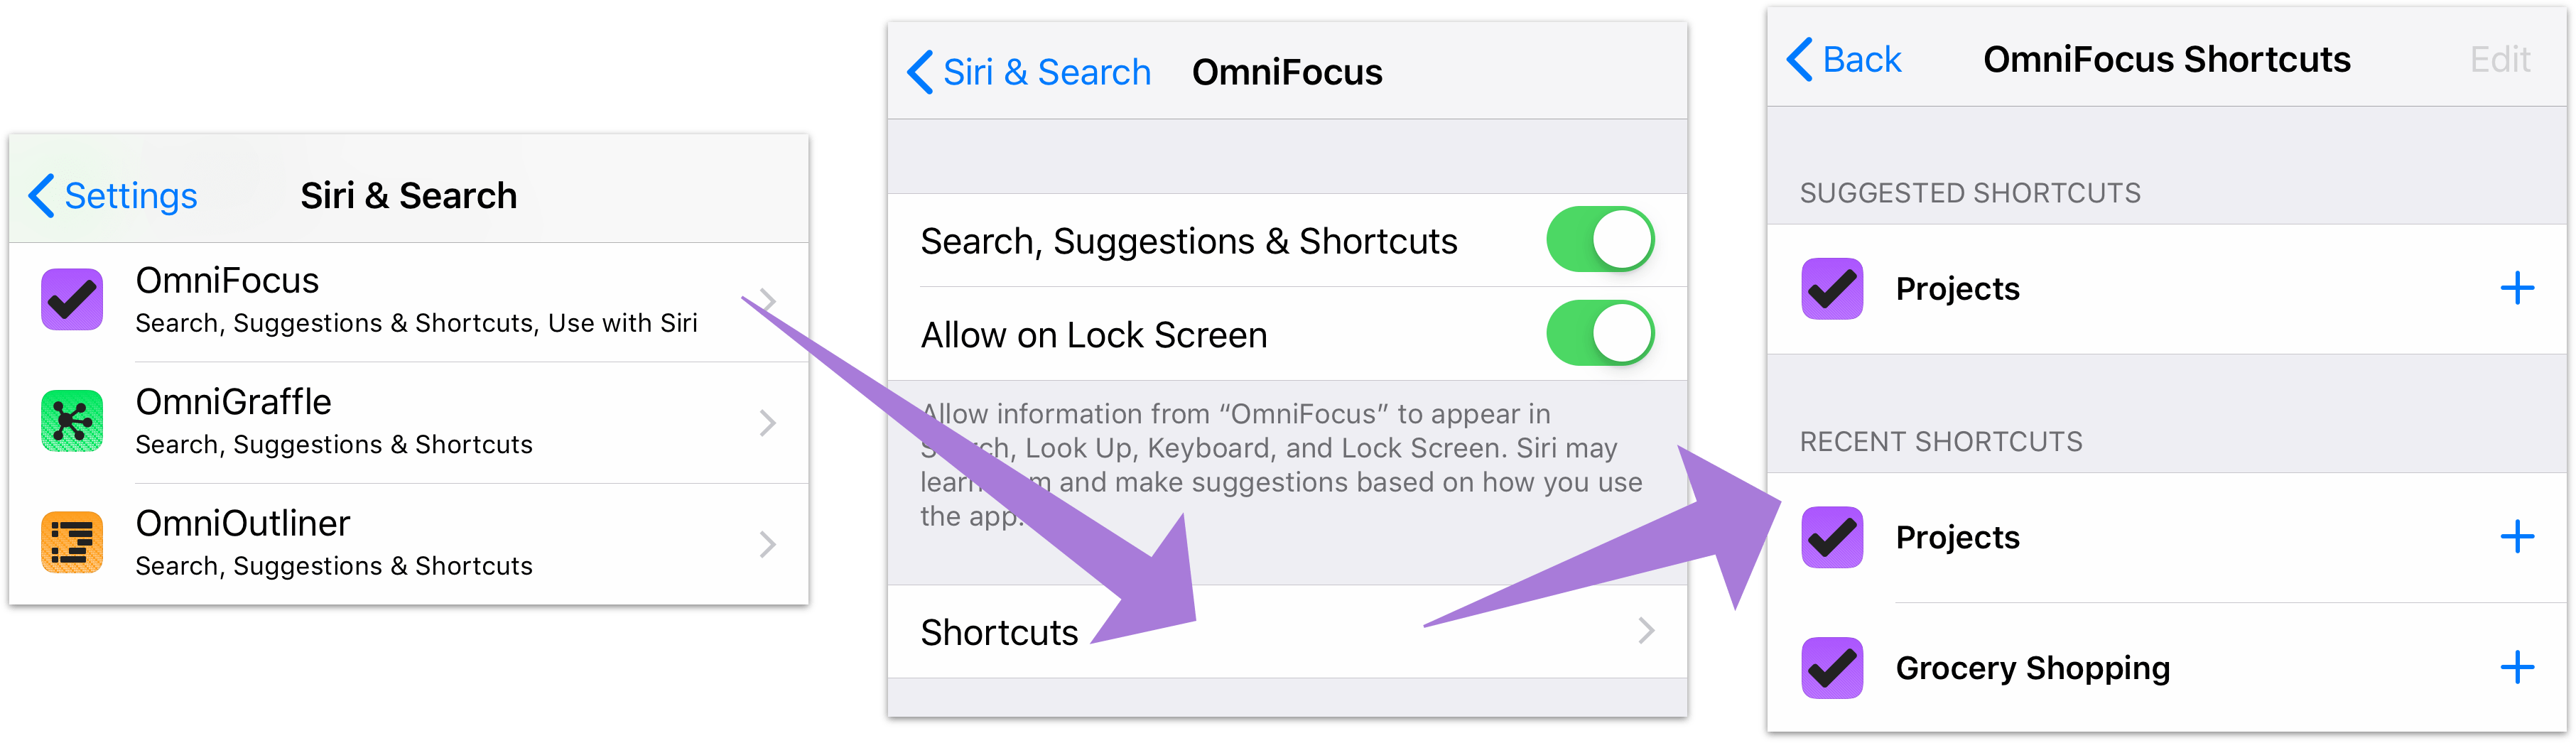 Navigating to the full list of recent OmniFocus shortcuts in iOS 12 Siri & Search settings